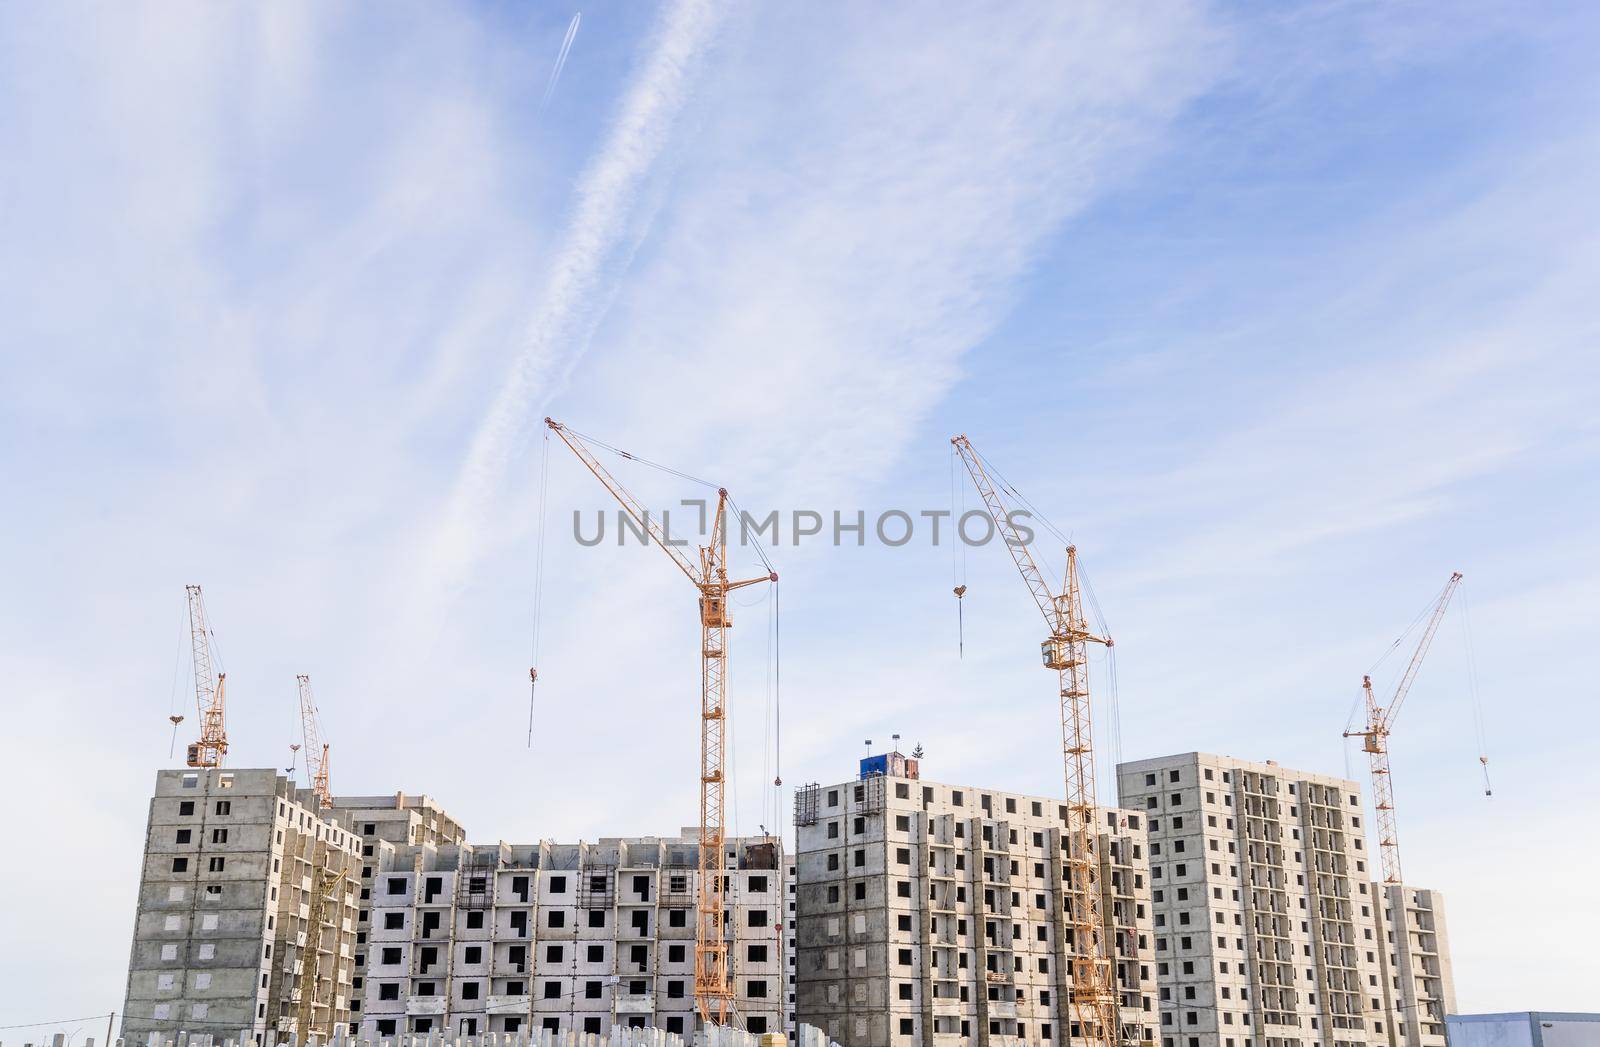 Construction site with cranes on sky background by Proff